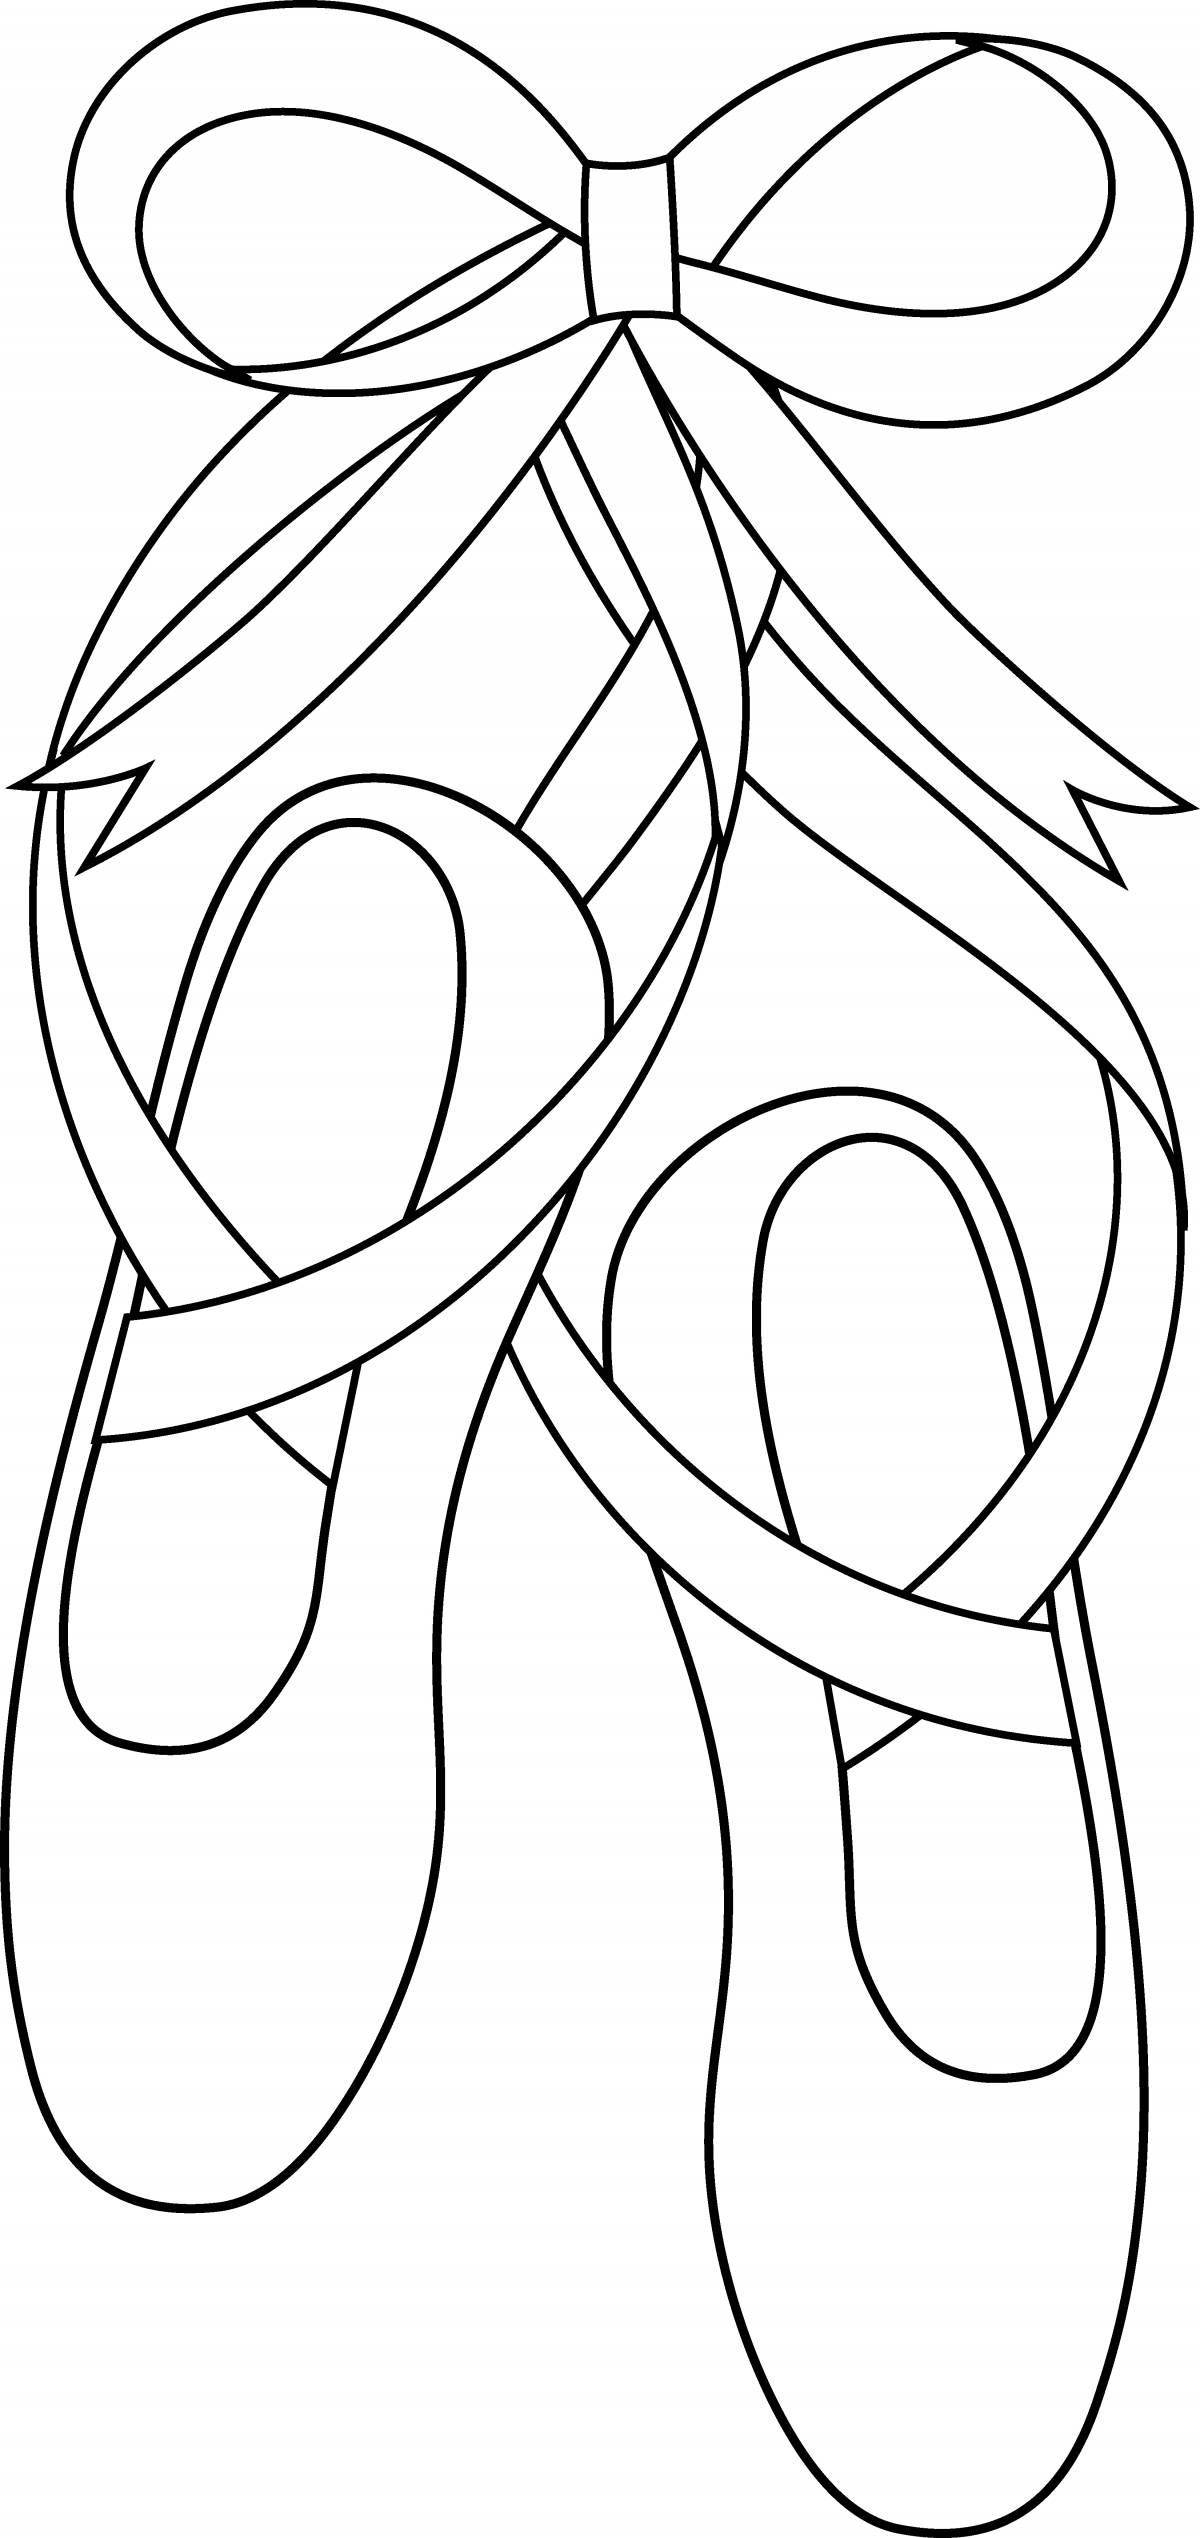 Coloring page funny pointe shoes